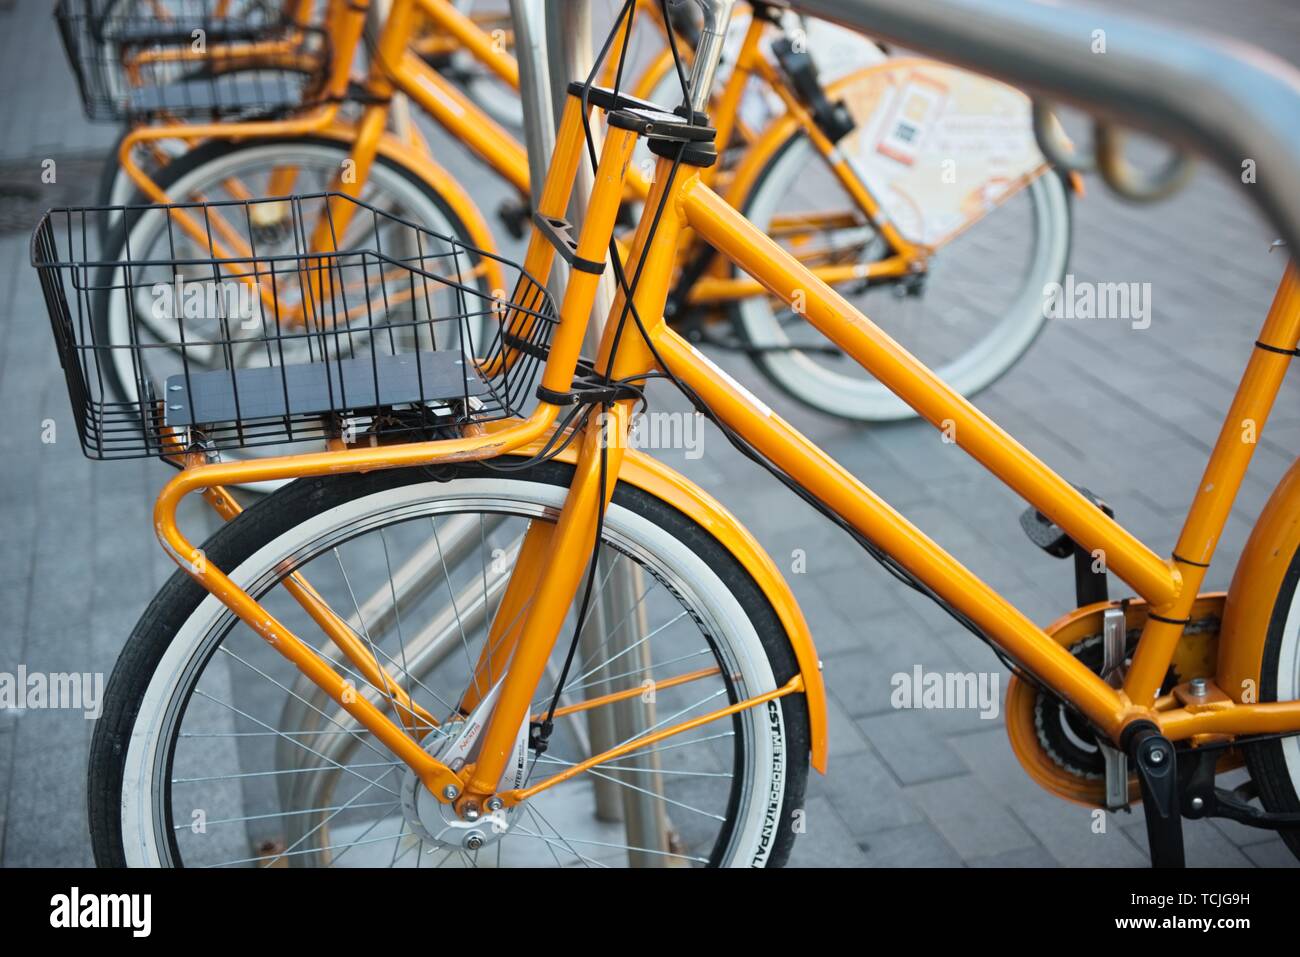 Kaunas, Lithuania, May 19, 2016: Shared bikes are lined up in the streets of Kaunas. CityBee station. Stock Photo